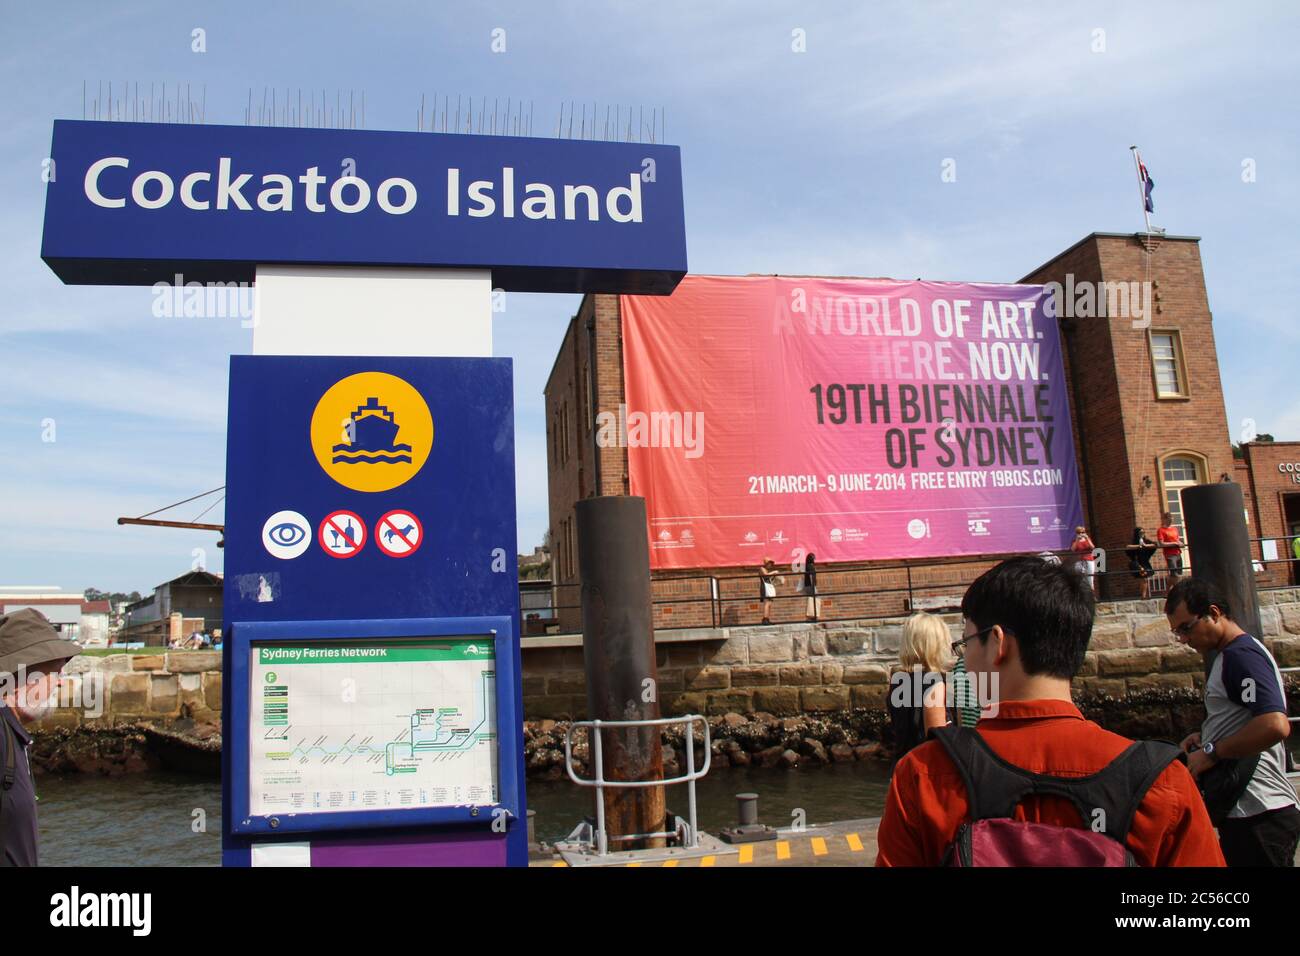 The arrival point at Cockatoo Island where part of the 19th Biennale of Sydney is taking place from 21 March to 9 June 2014. Stock Photo